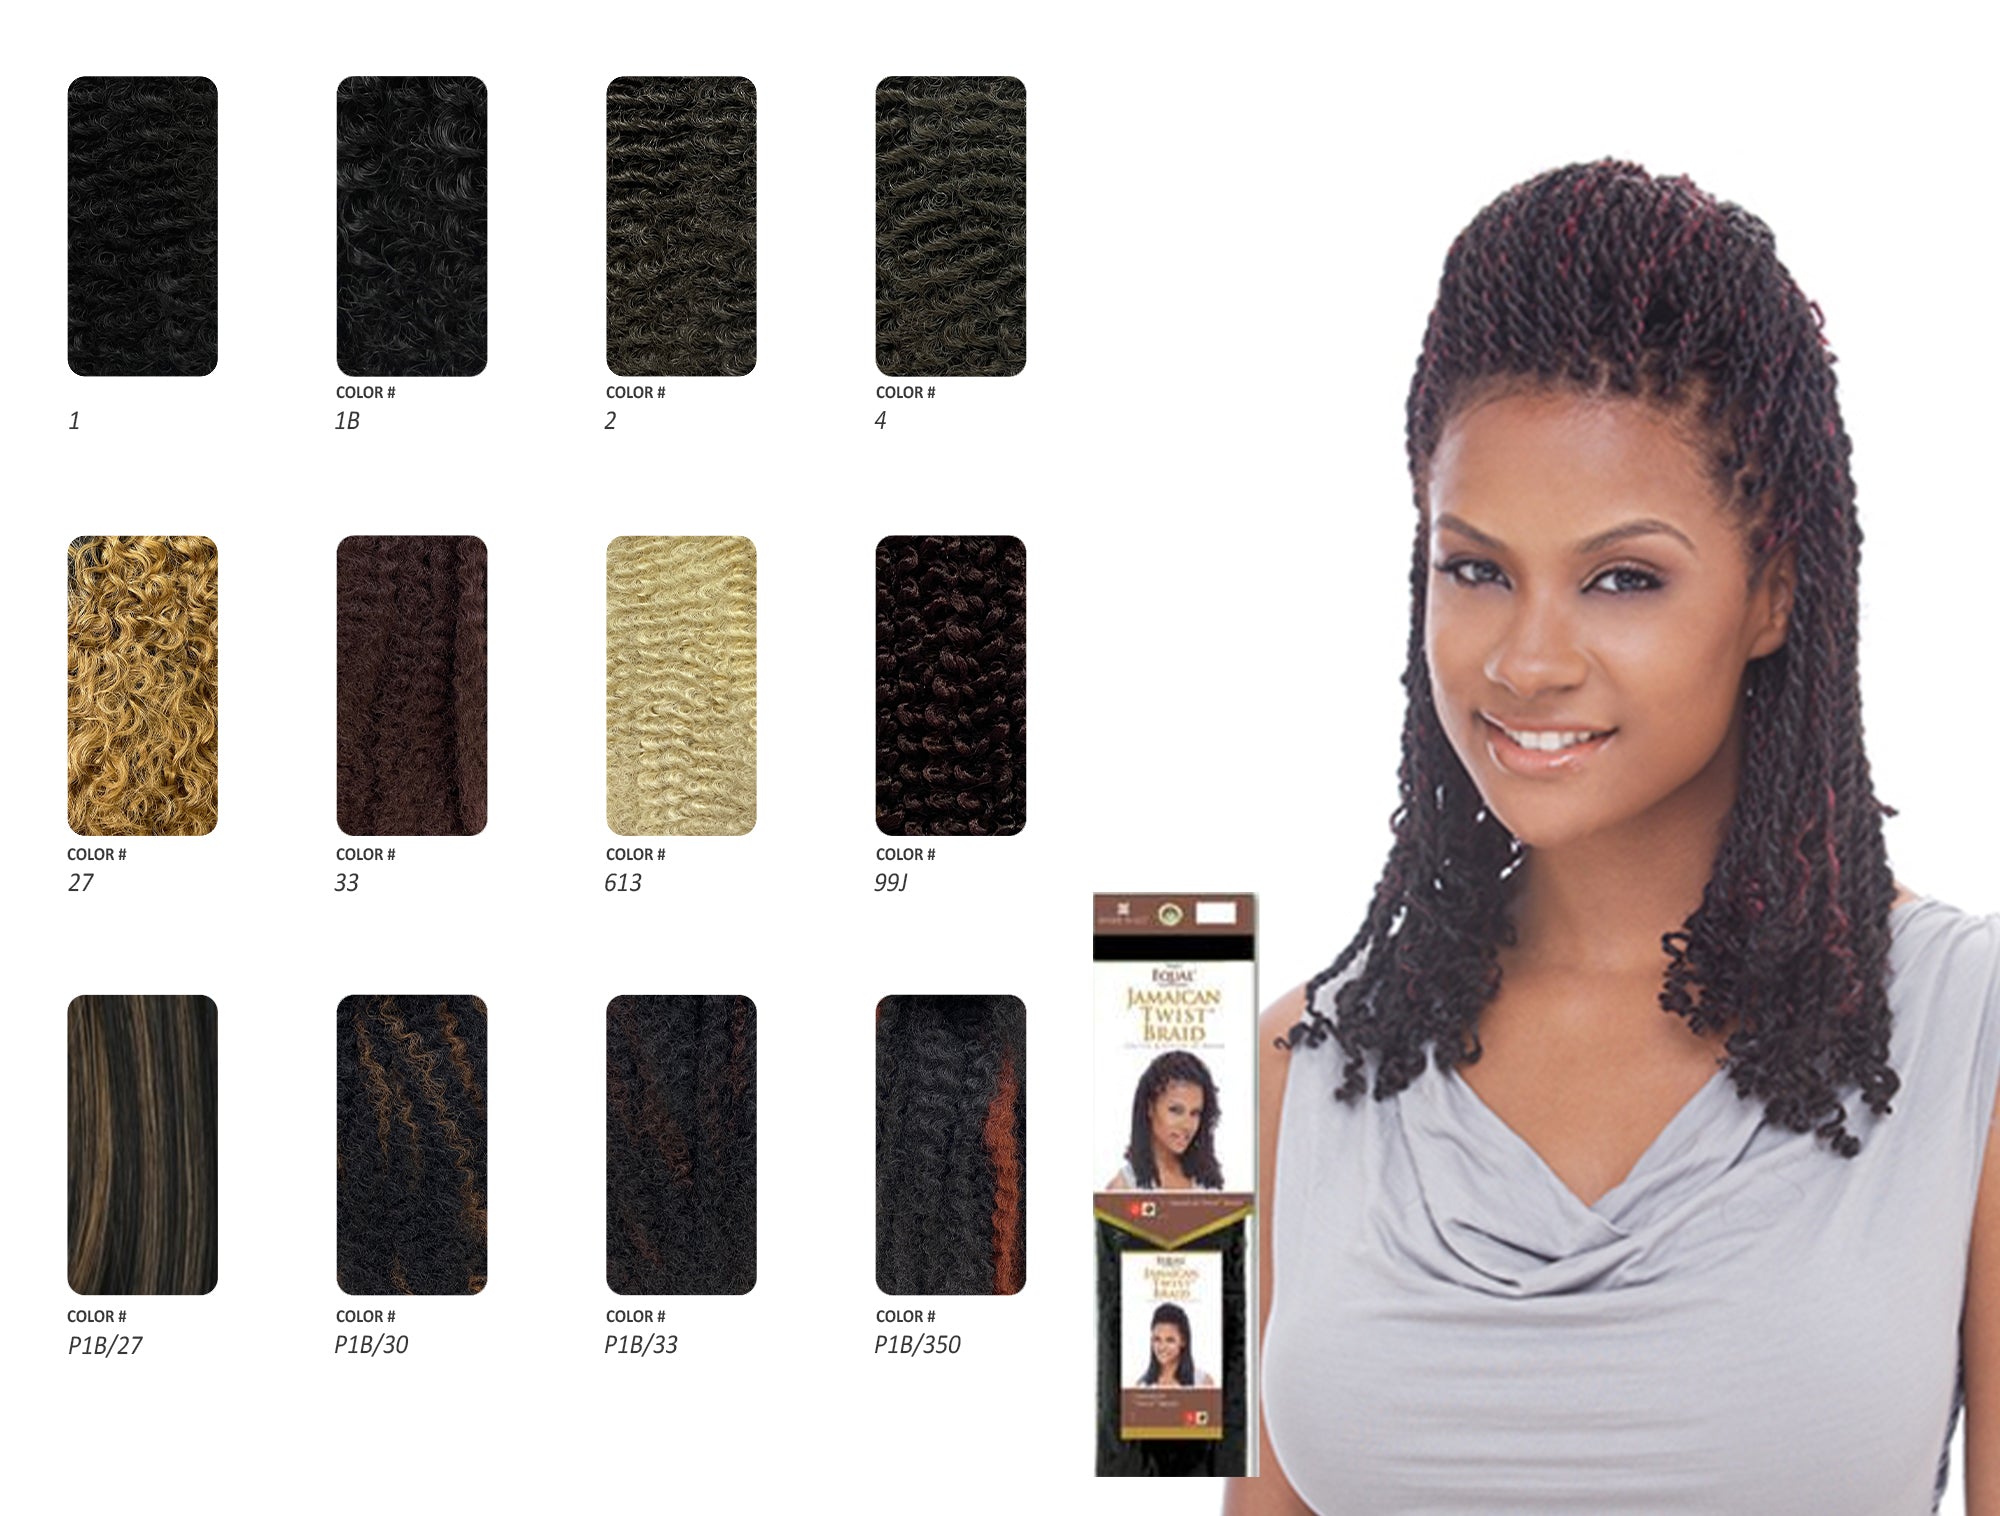 SHAKE-N-GO FreeTress EQUAL - Jamaican Twist Braid EXTRA LONG (Marley Braid)  - Canada wide beauty supply online store for wigs, braids, weaves,  extensions, cosmetics, beauty applinaces, and beauty cares